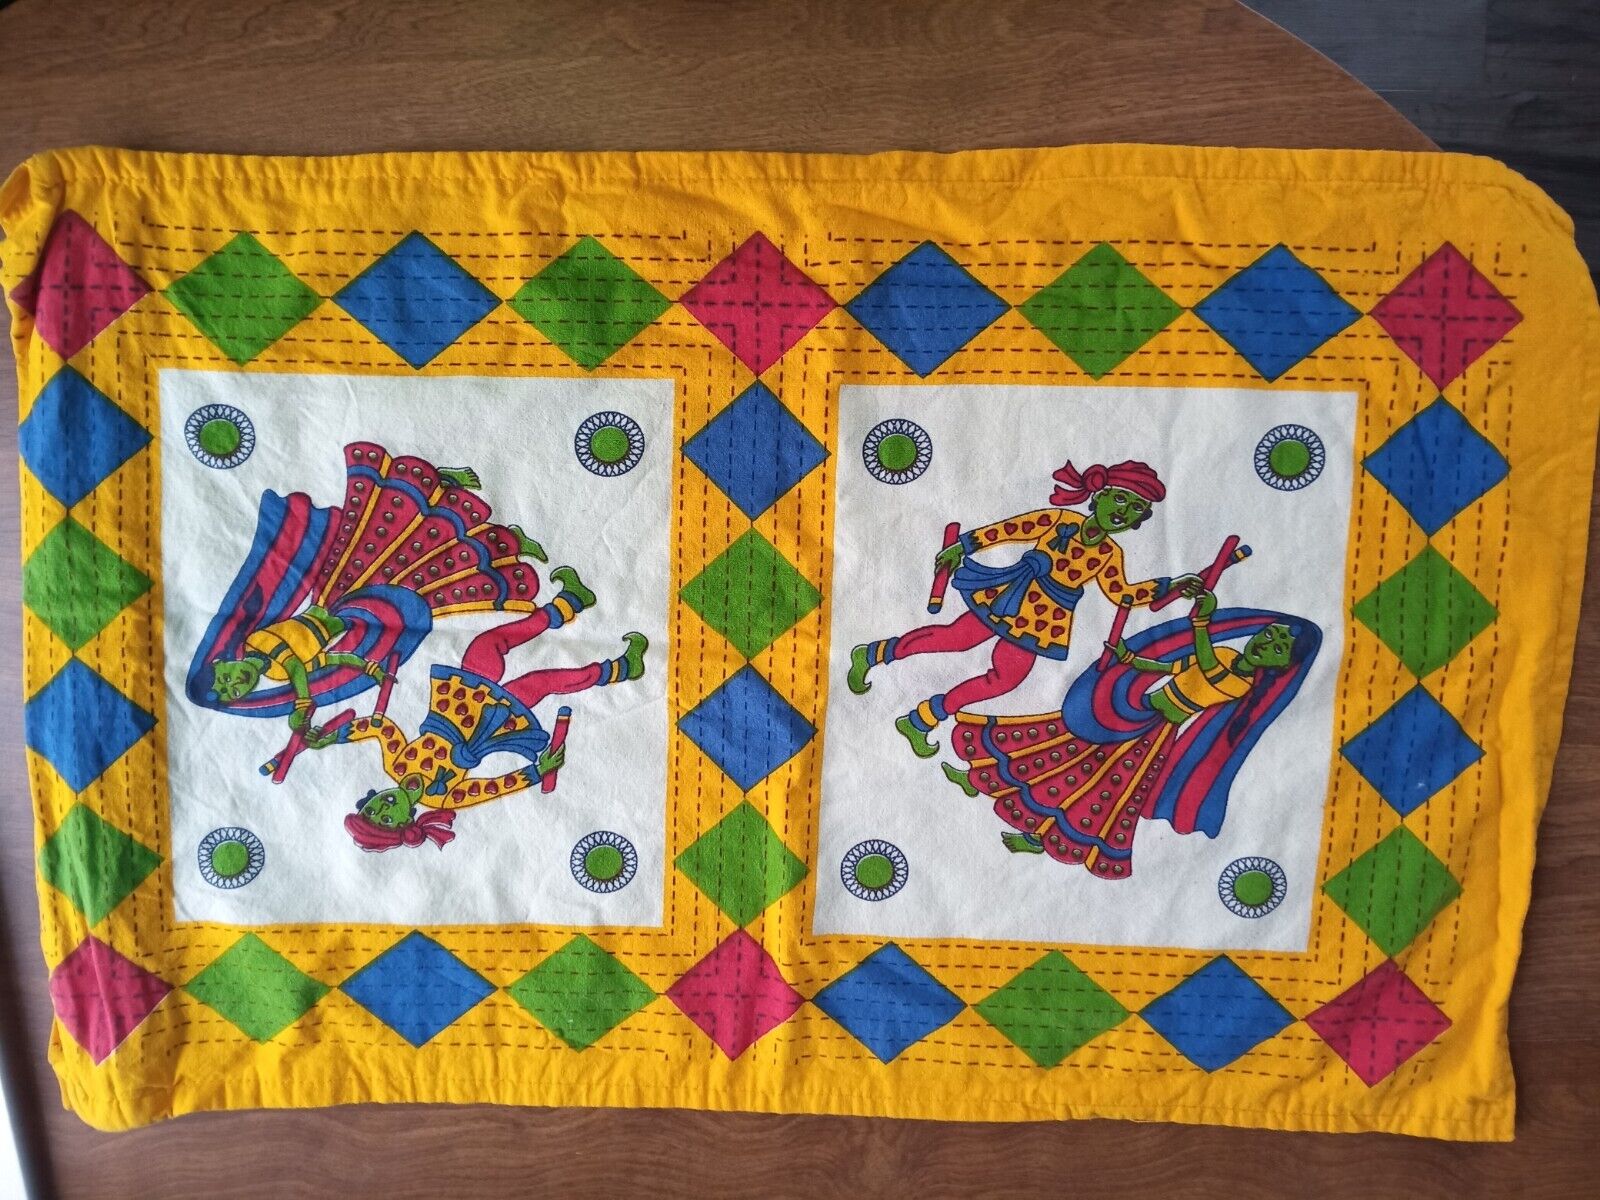 2 Vintage India Design Zippered Pillow Cases Covers Beautiful and Vibrant Colors